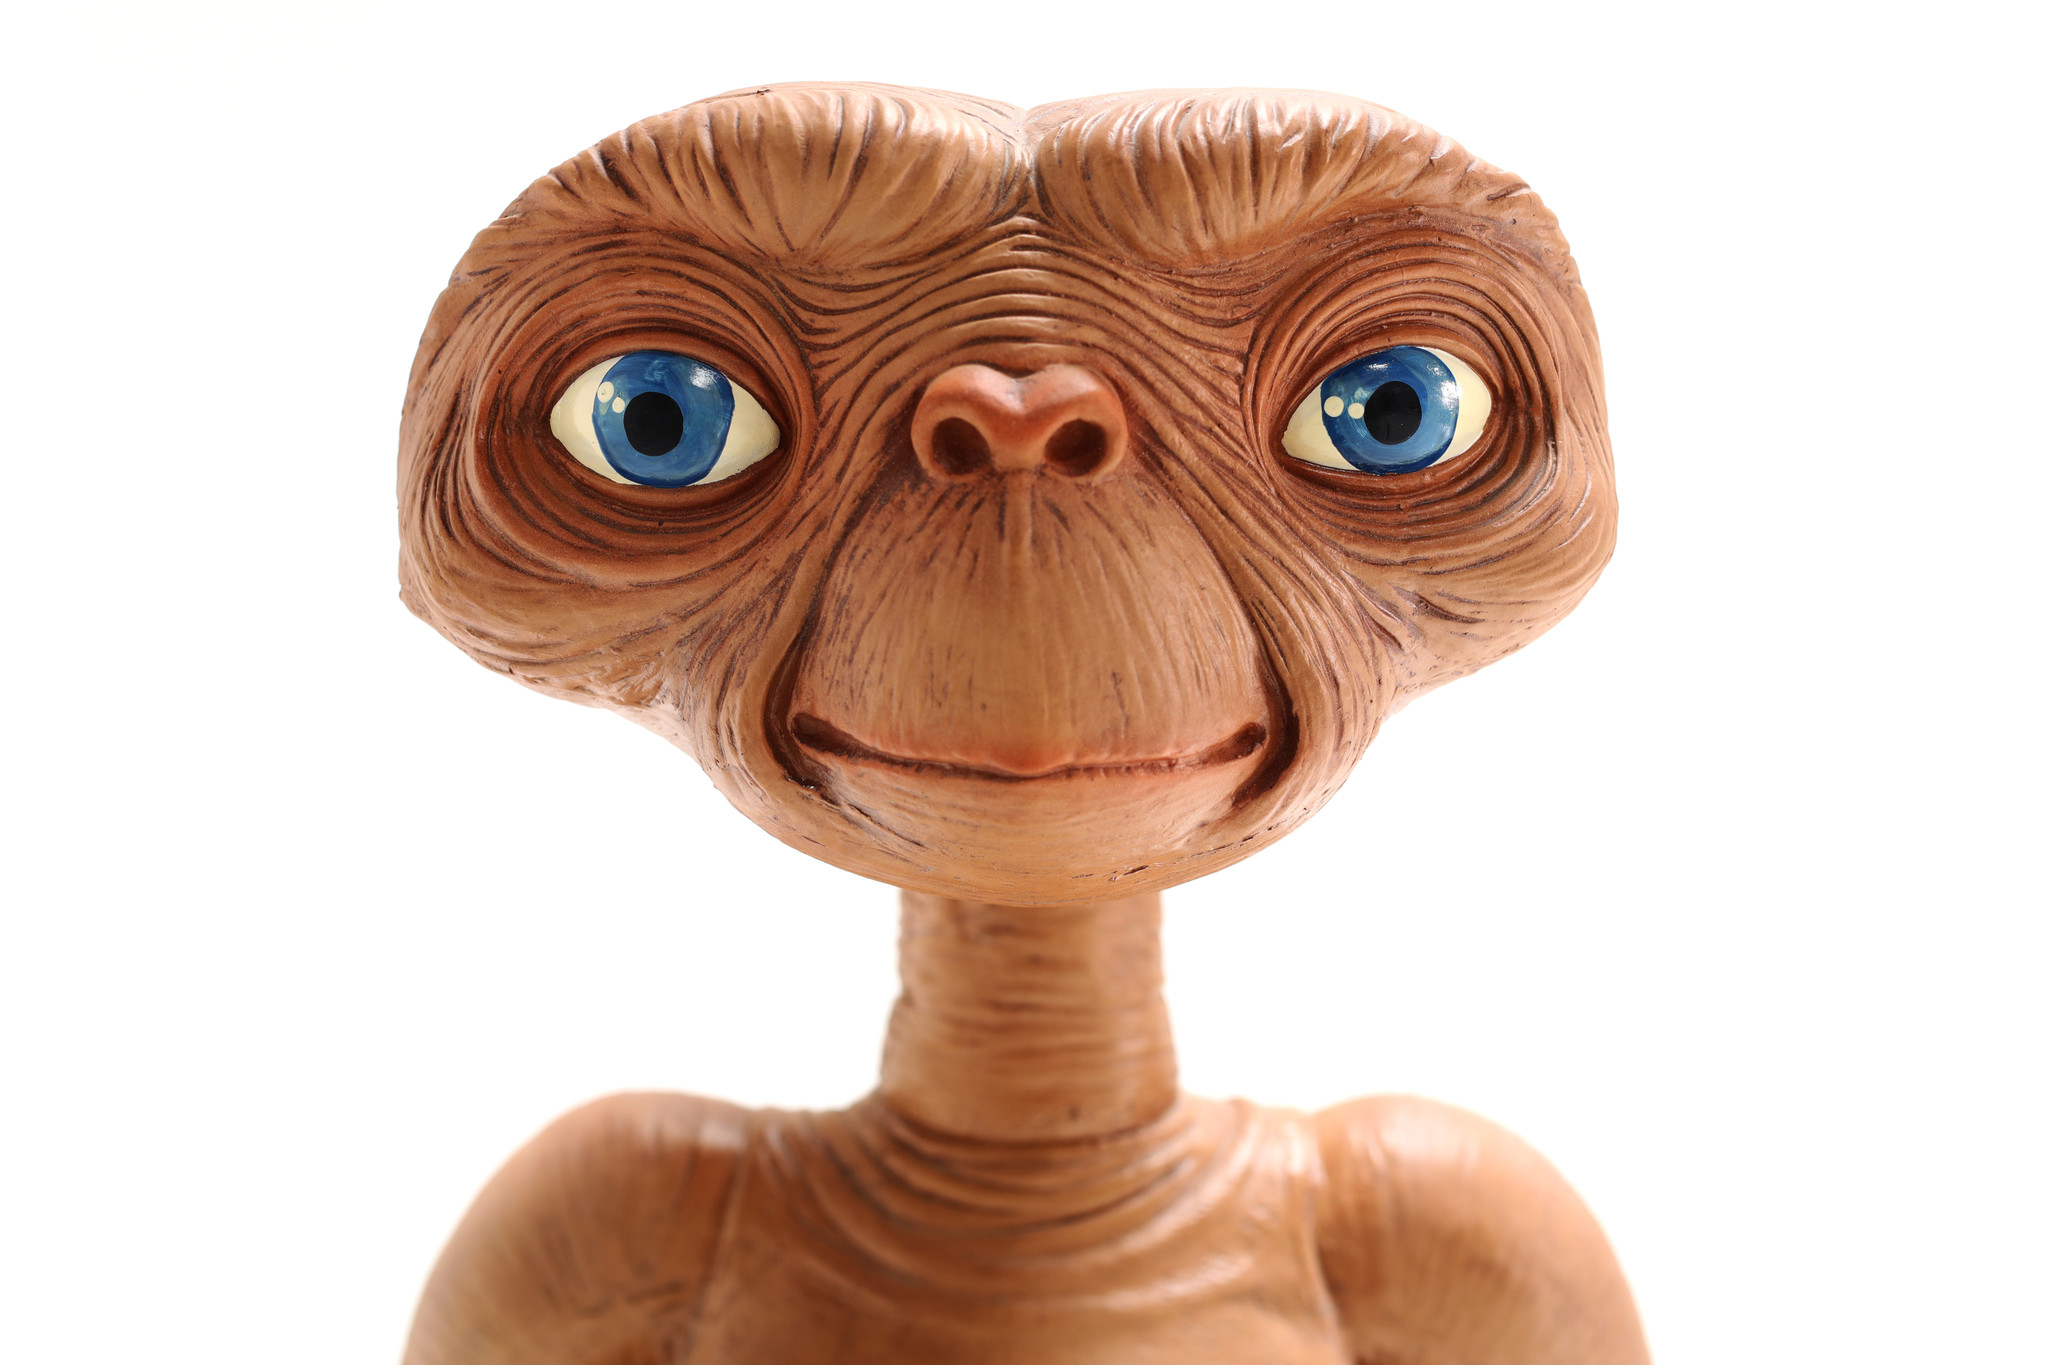 Original life size ET produced by Universal studio for Neca